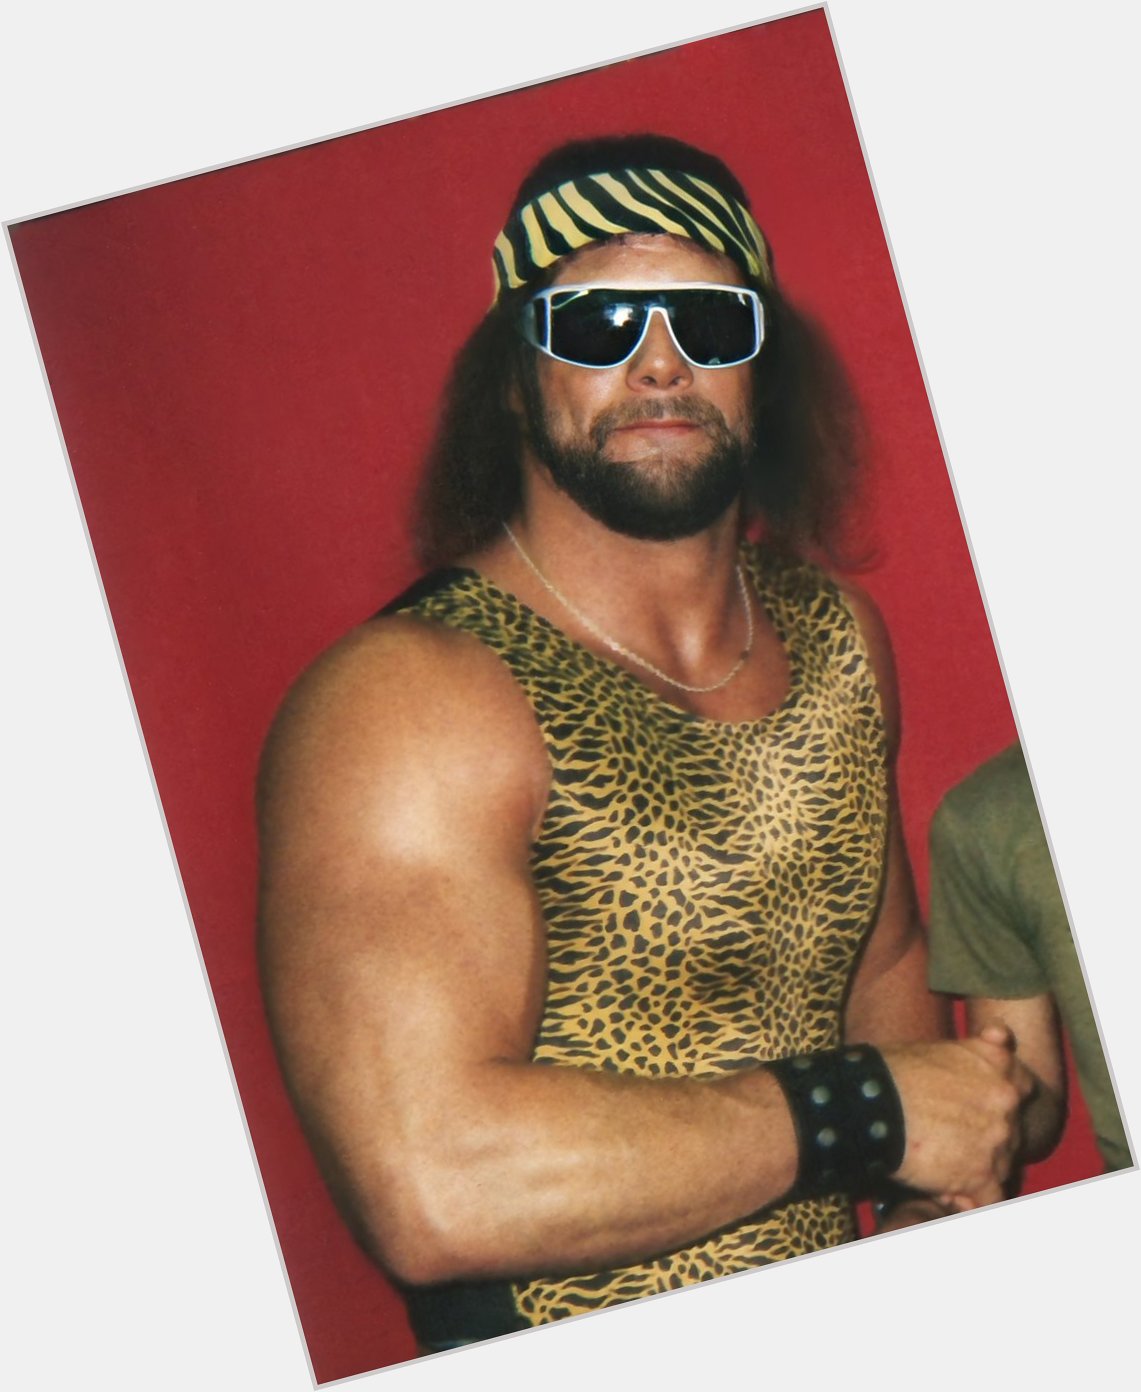 Upscaled using the Retro setting 
Sourced from Wikipedia

A happy posthumous birthday to the Randy Savage! 